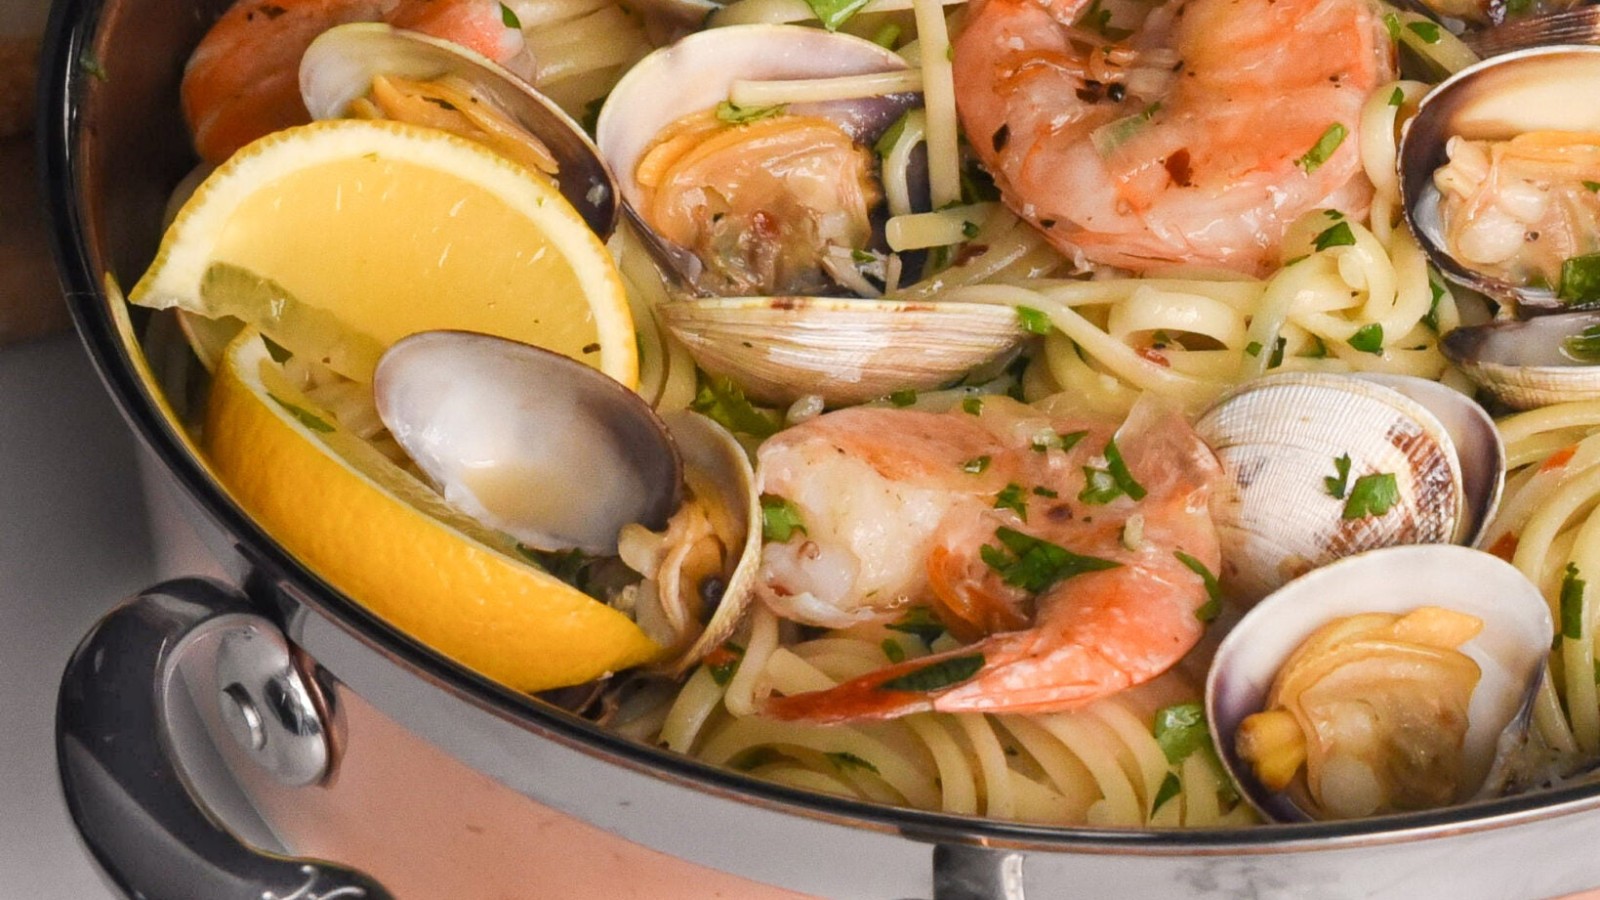 Image of Spicy Linguine with Clams and Shrimp